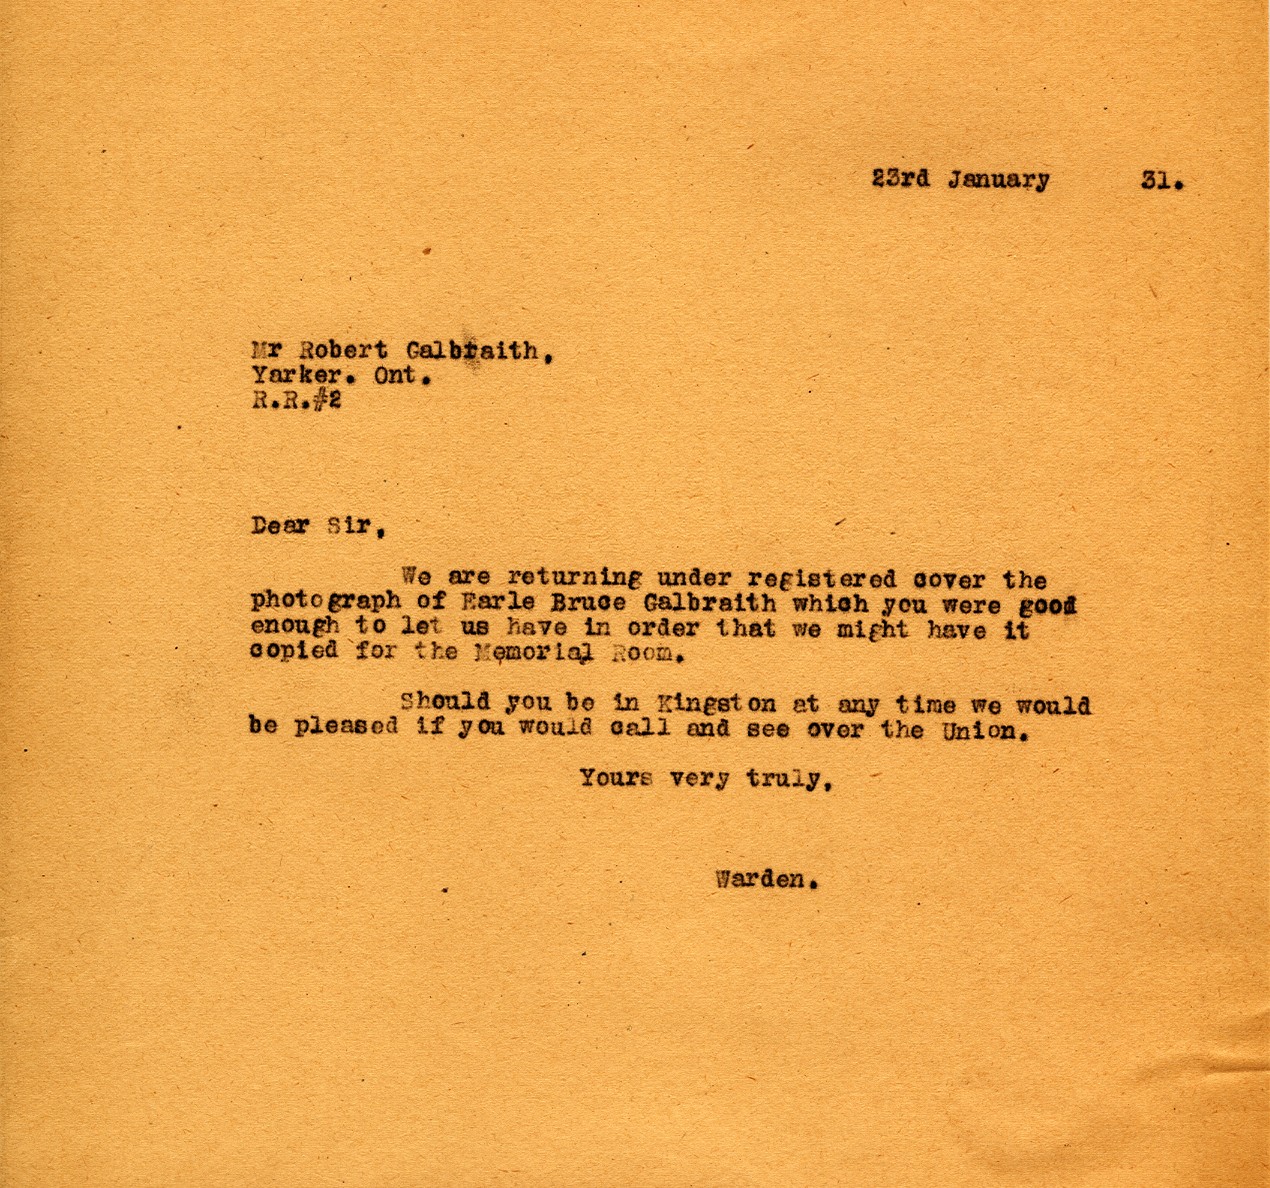 Letter from the Warden to Mr. Robert Galbraith, 23rd January 1931